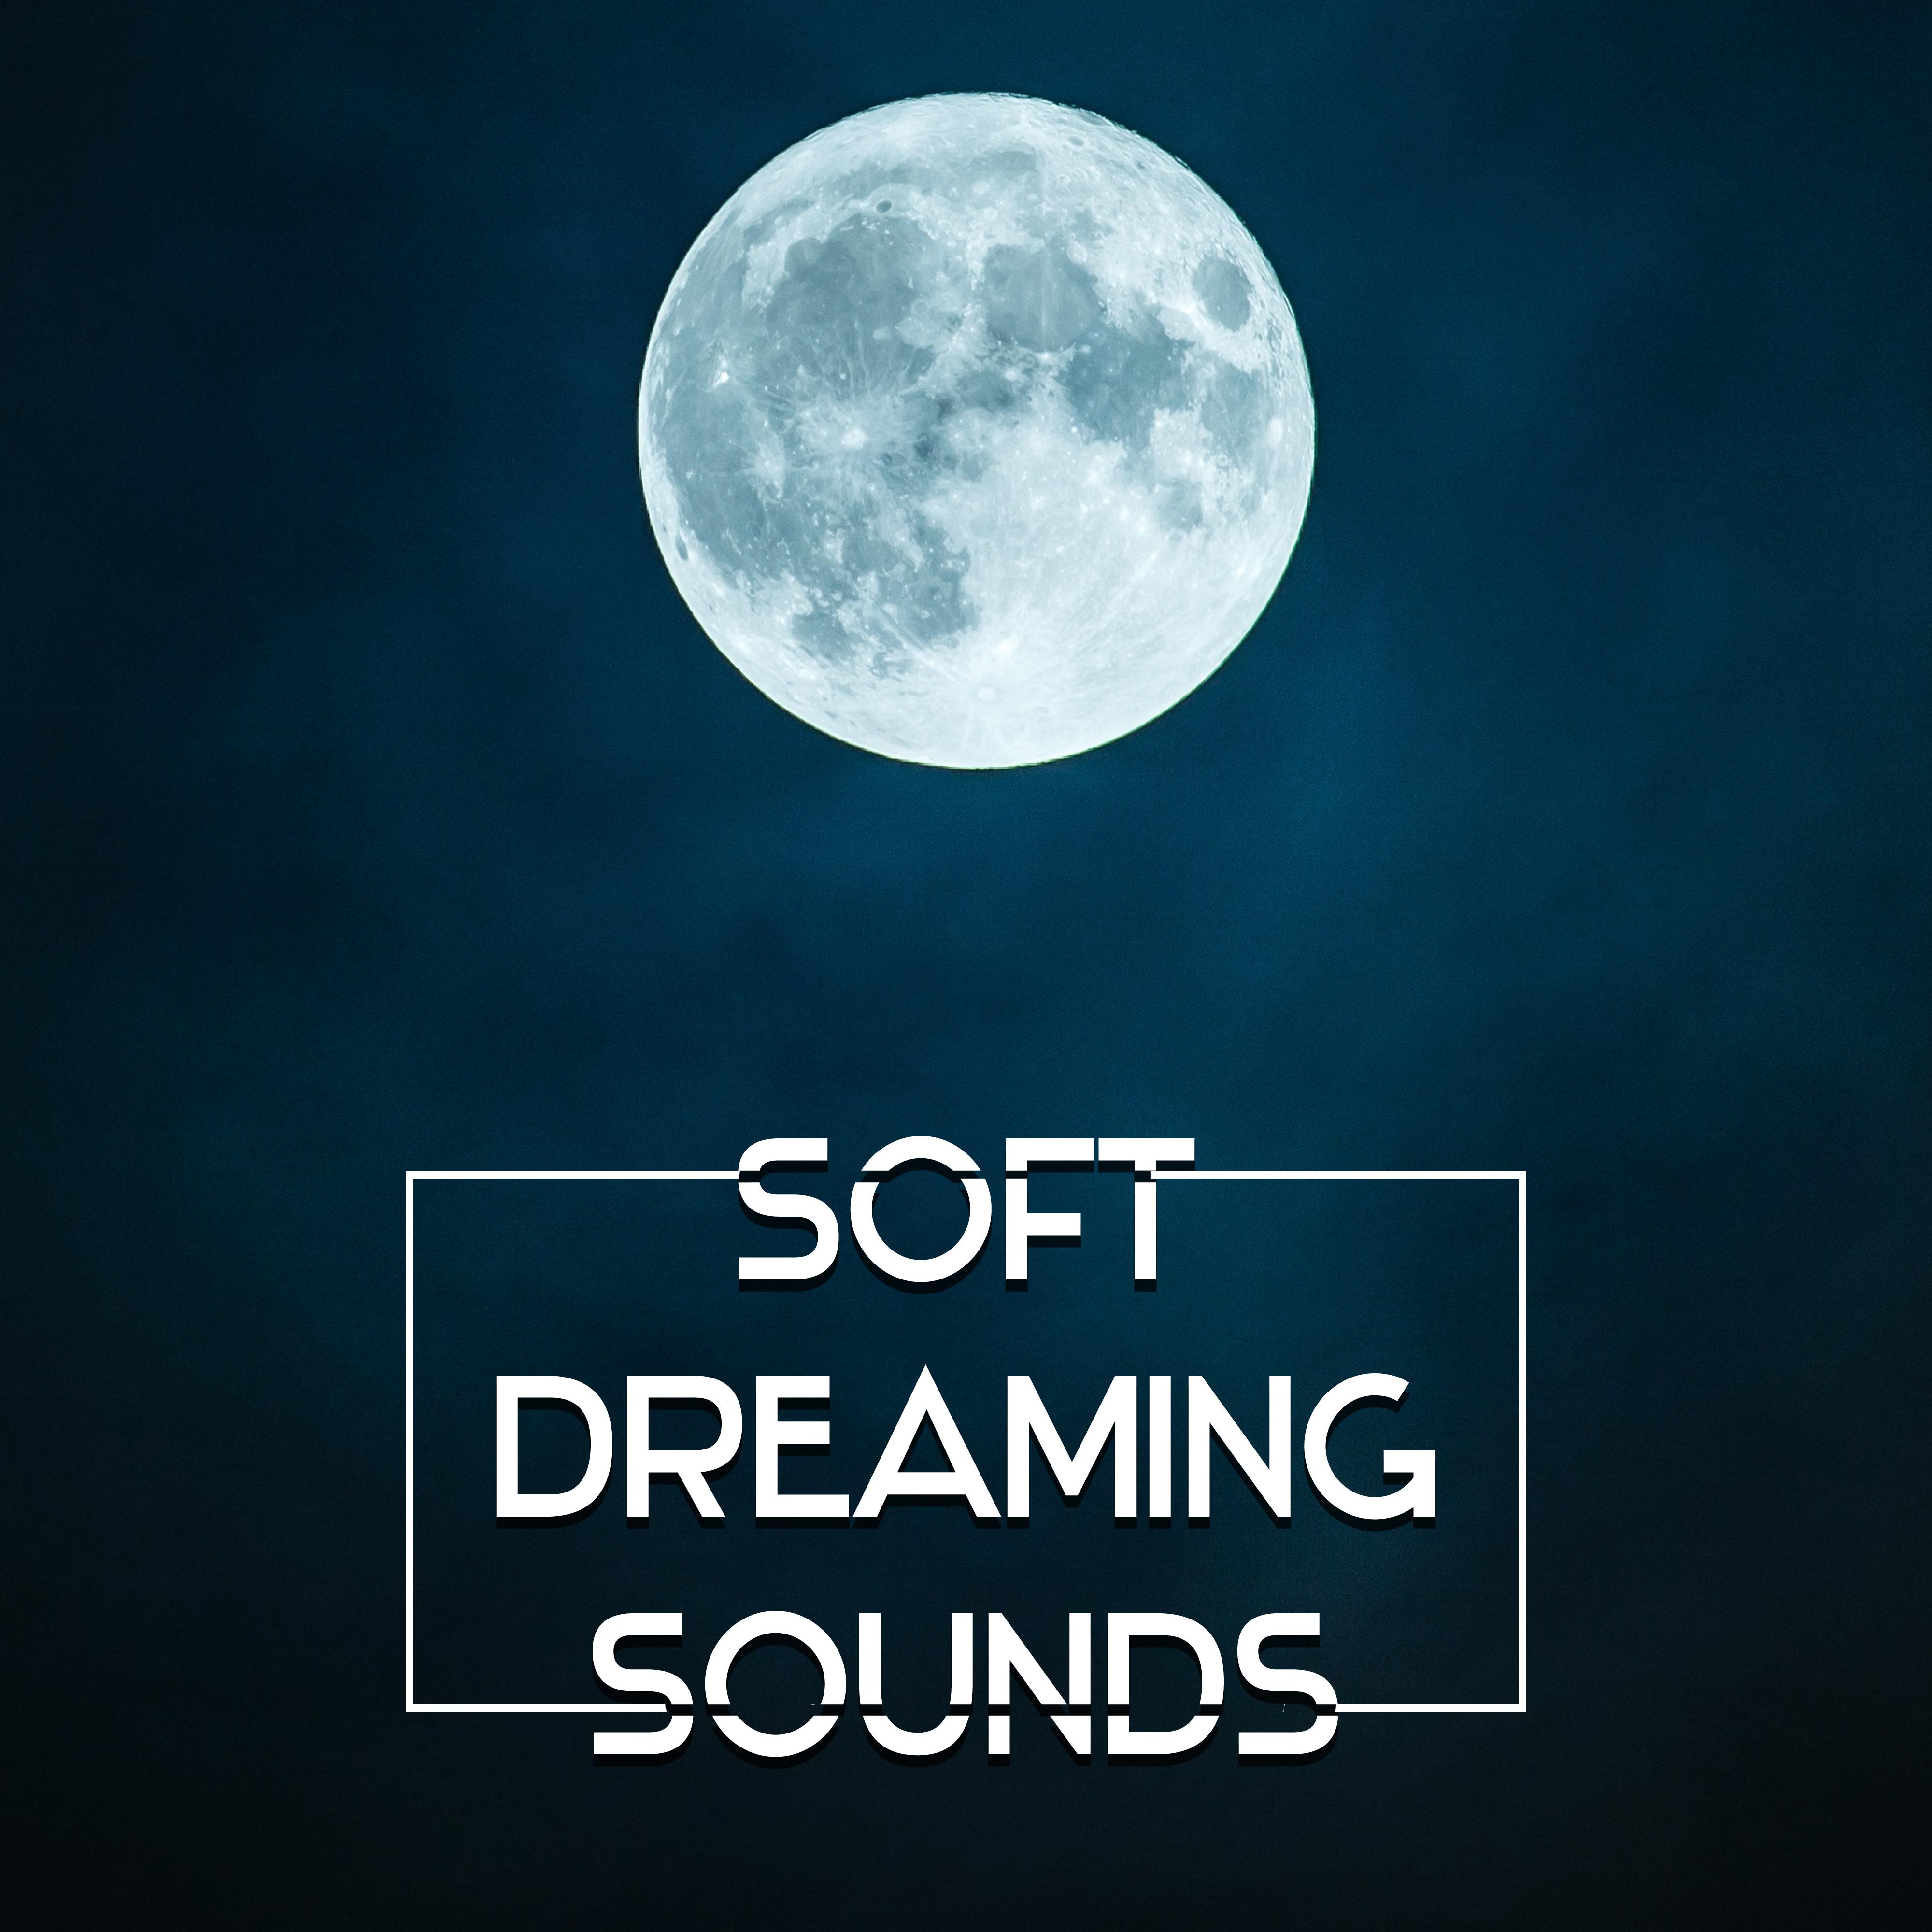 Soft Dreaming Sounds  Easy Listening New Age Songs, Music to Calm Sleep, Rest in Bed, Nature Waves